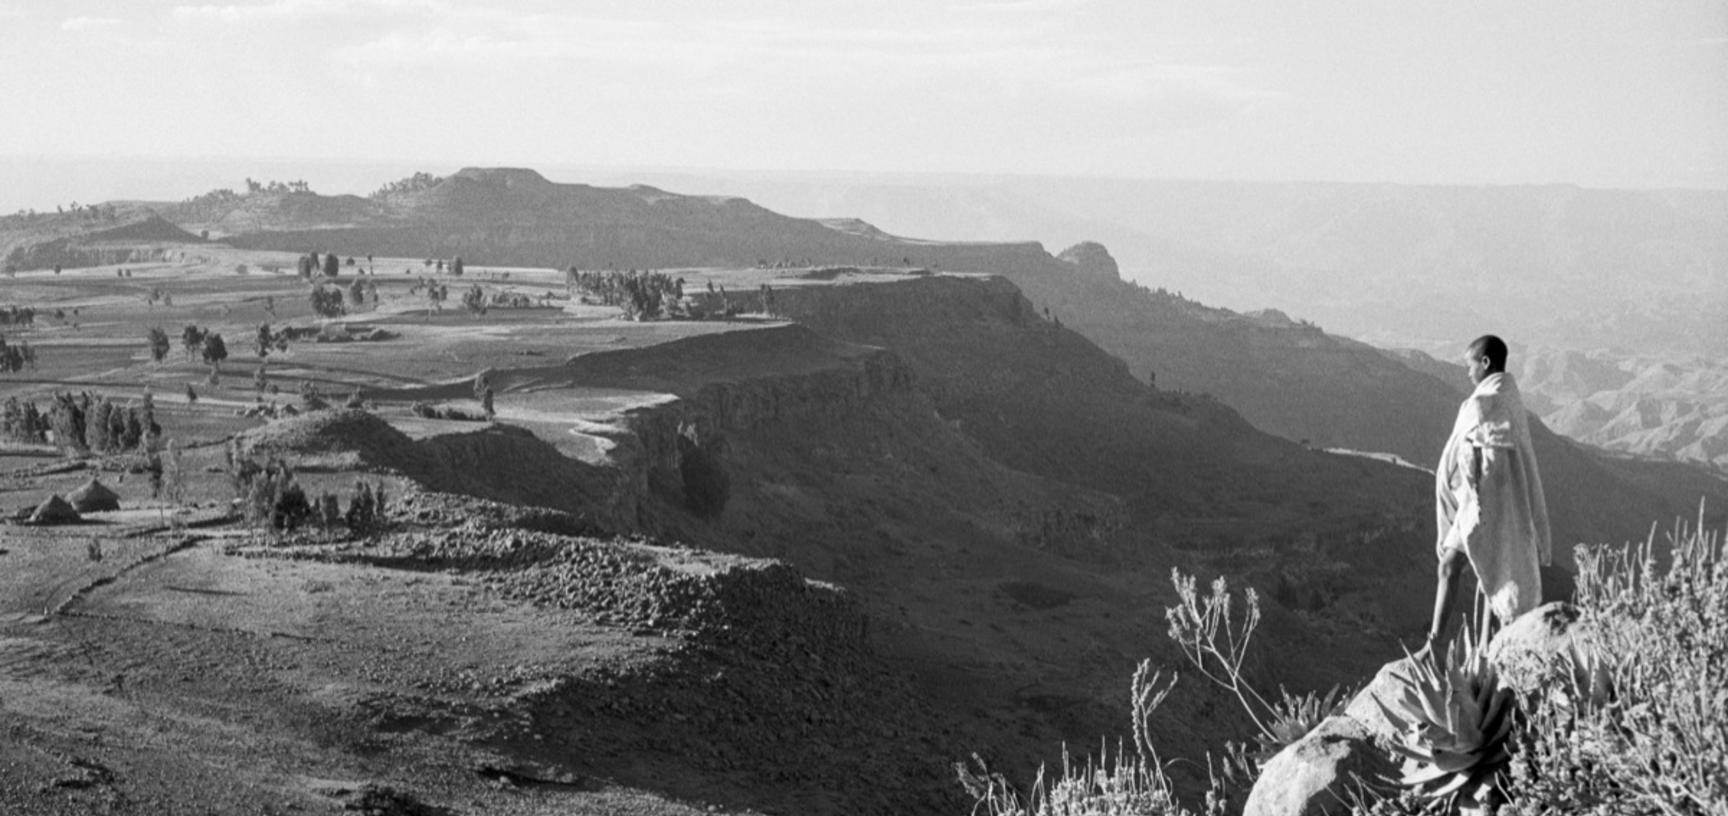 View of an escarpment near Magdala, with a boy standing on rocks in the foreground. Tanta, Ethiopia. Photograph by Wilfred Thesiger. 1960.